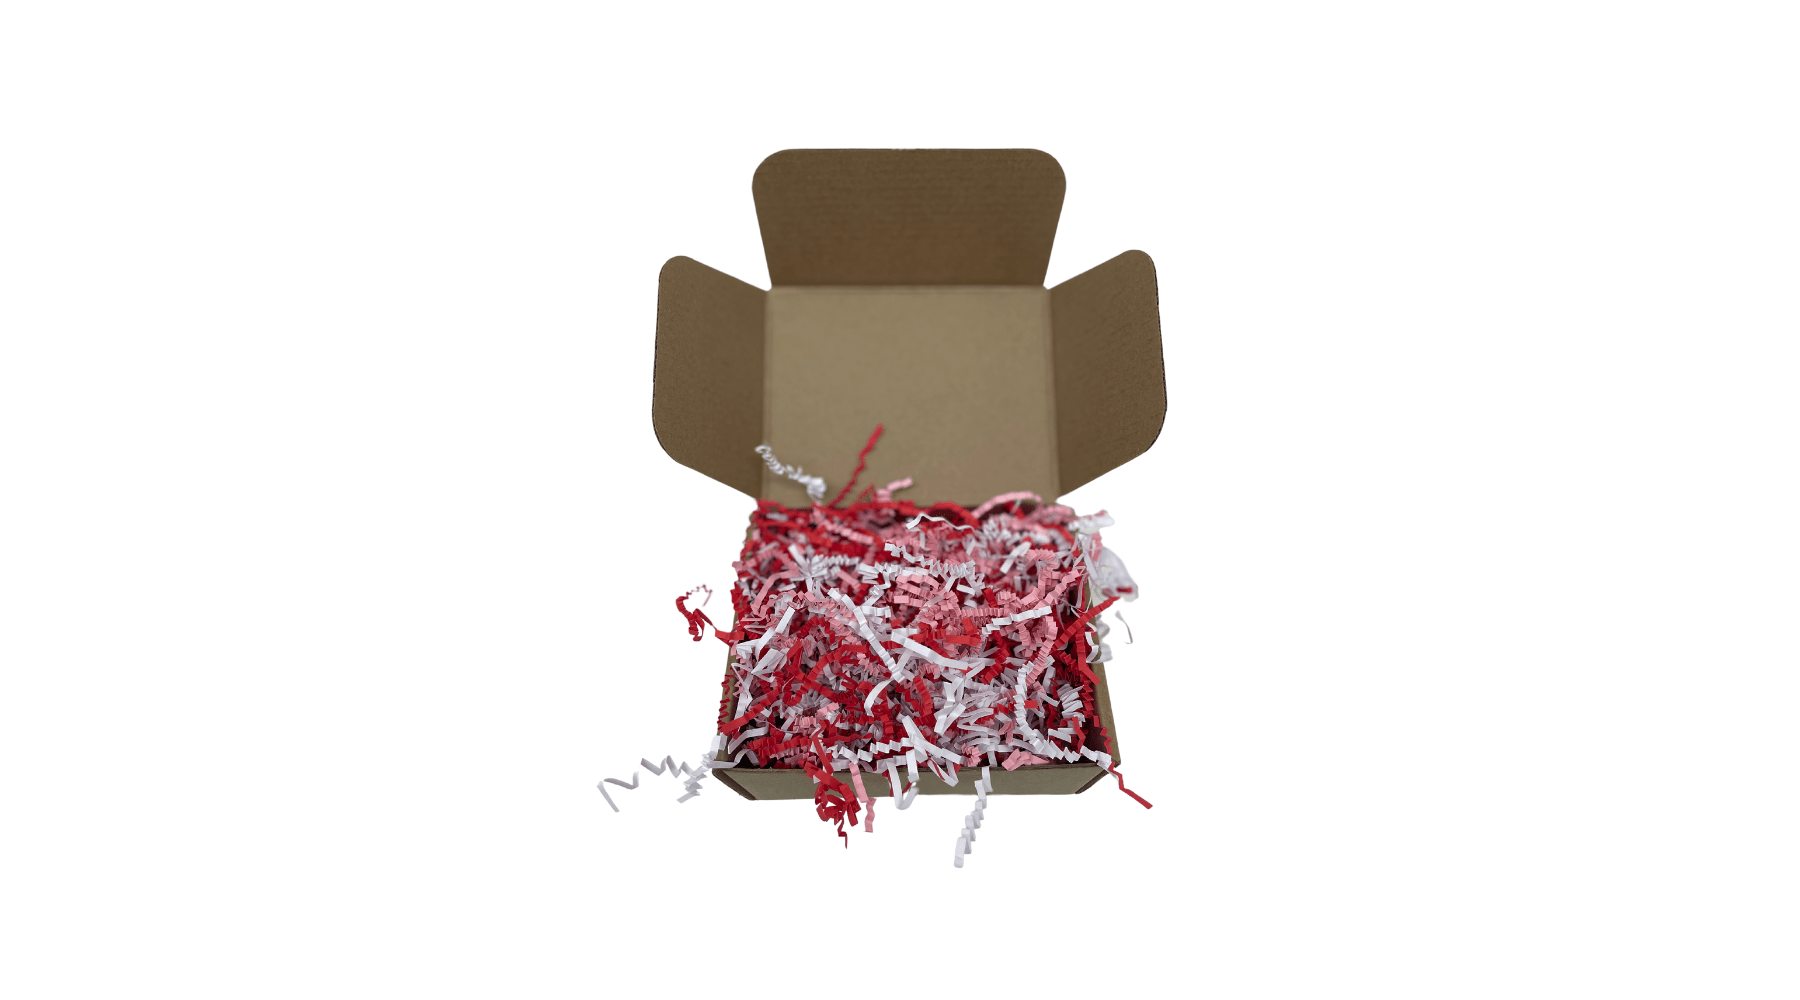 Why Is Shredded Paper Important? - Happy Box